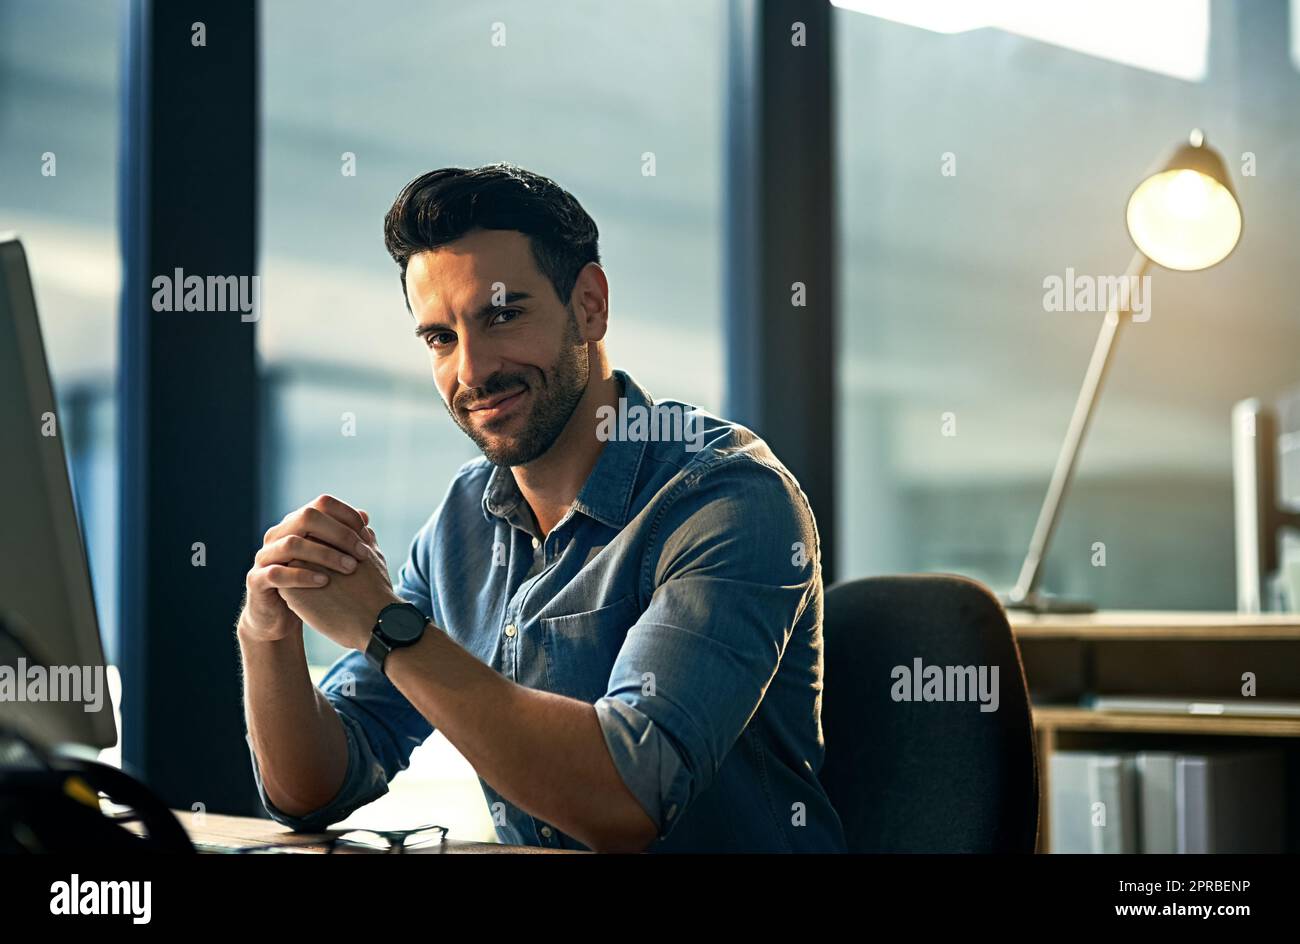 Portrait of a young businessman on a computer during a late night at work. Confident hardworking man at a corporate office desk working overtime, dedicated and committed alone at the workplace. Stock Photo